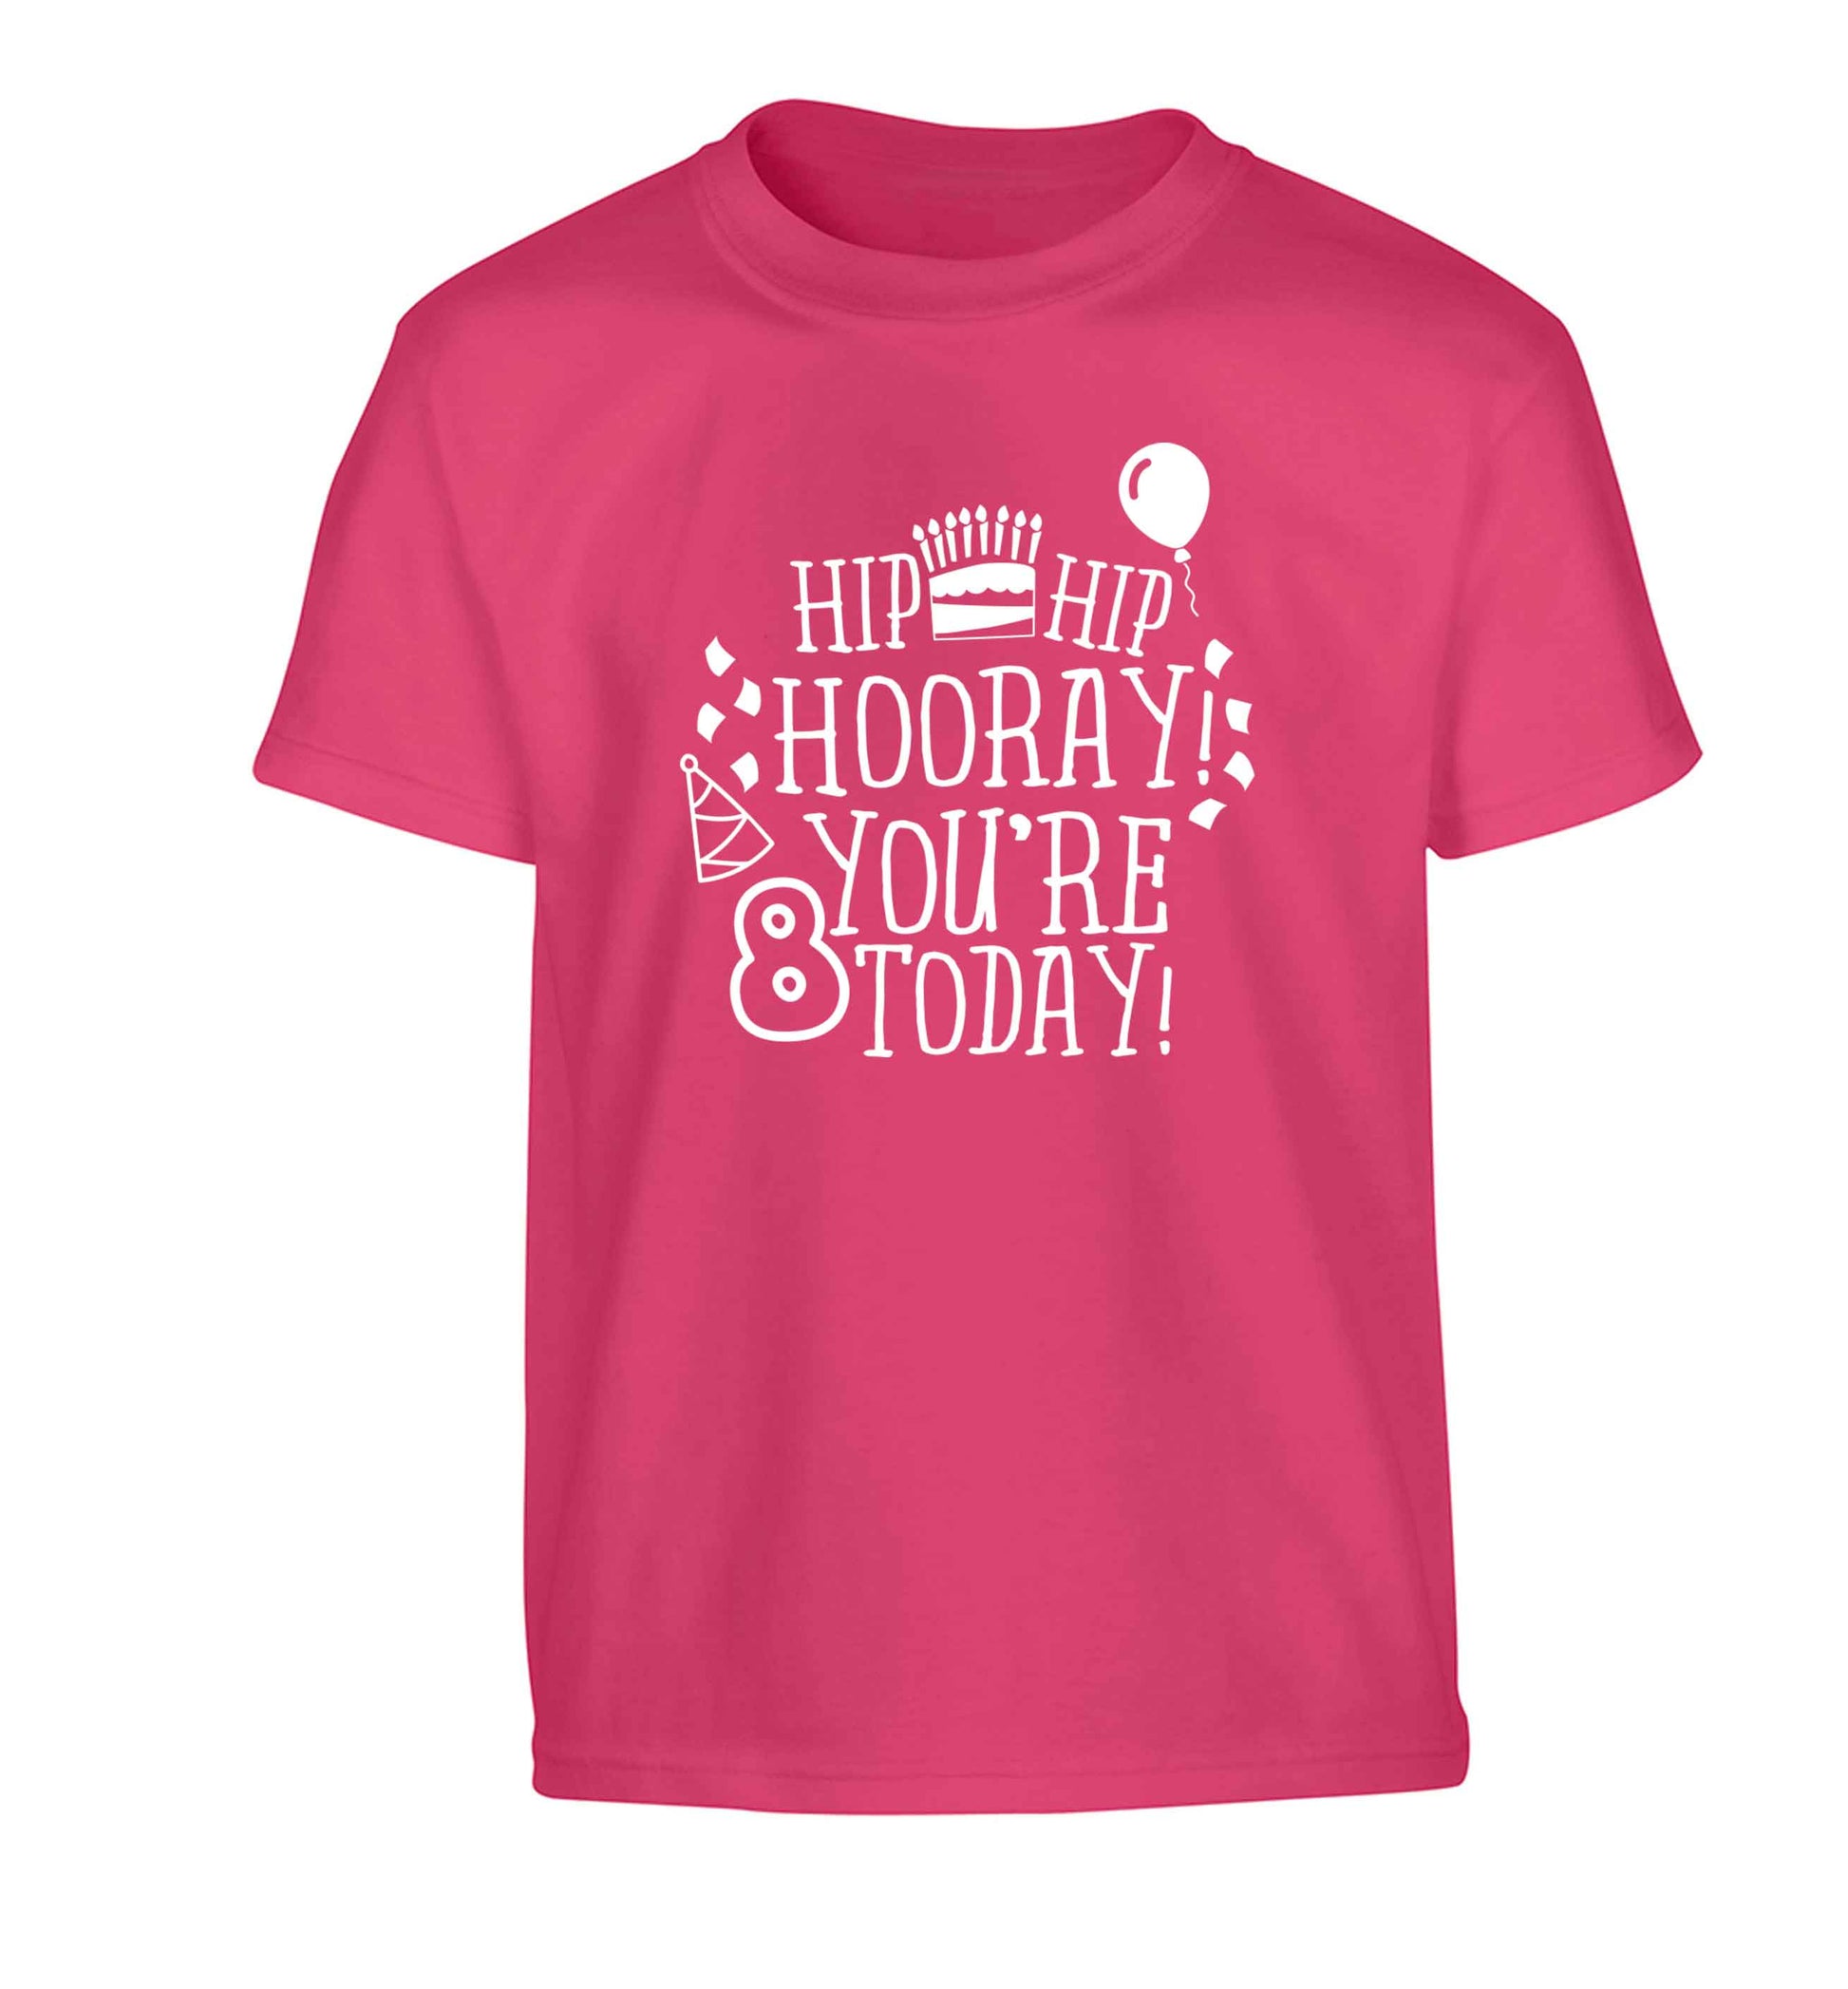 Hip hip hooray you're 8 today! Children's pink Tshirt 12-13 Years